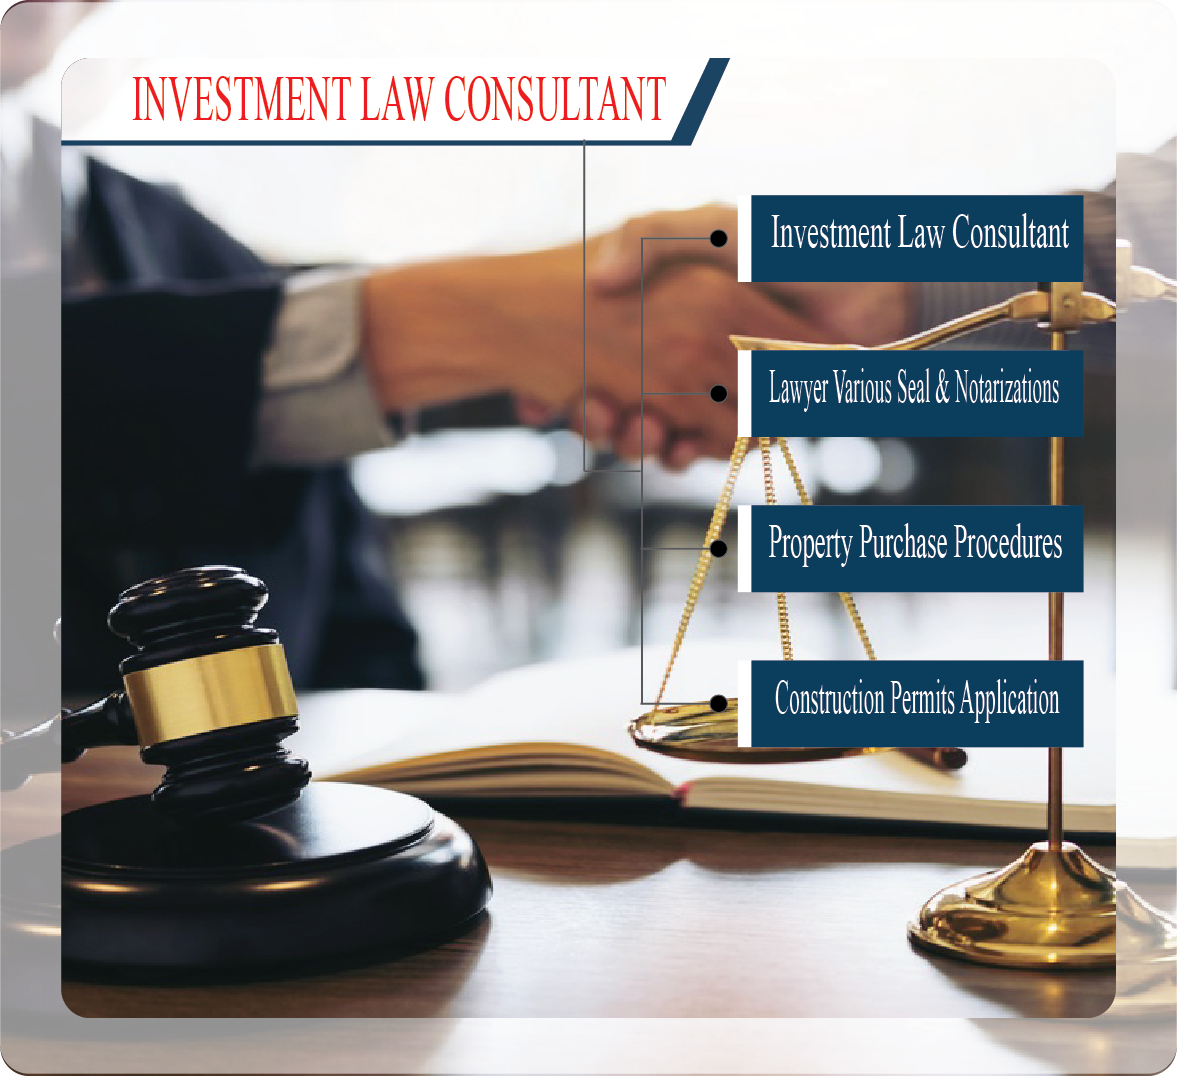 Investment Law Consultant